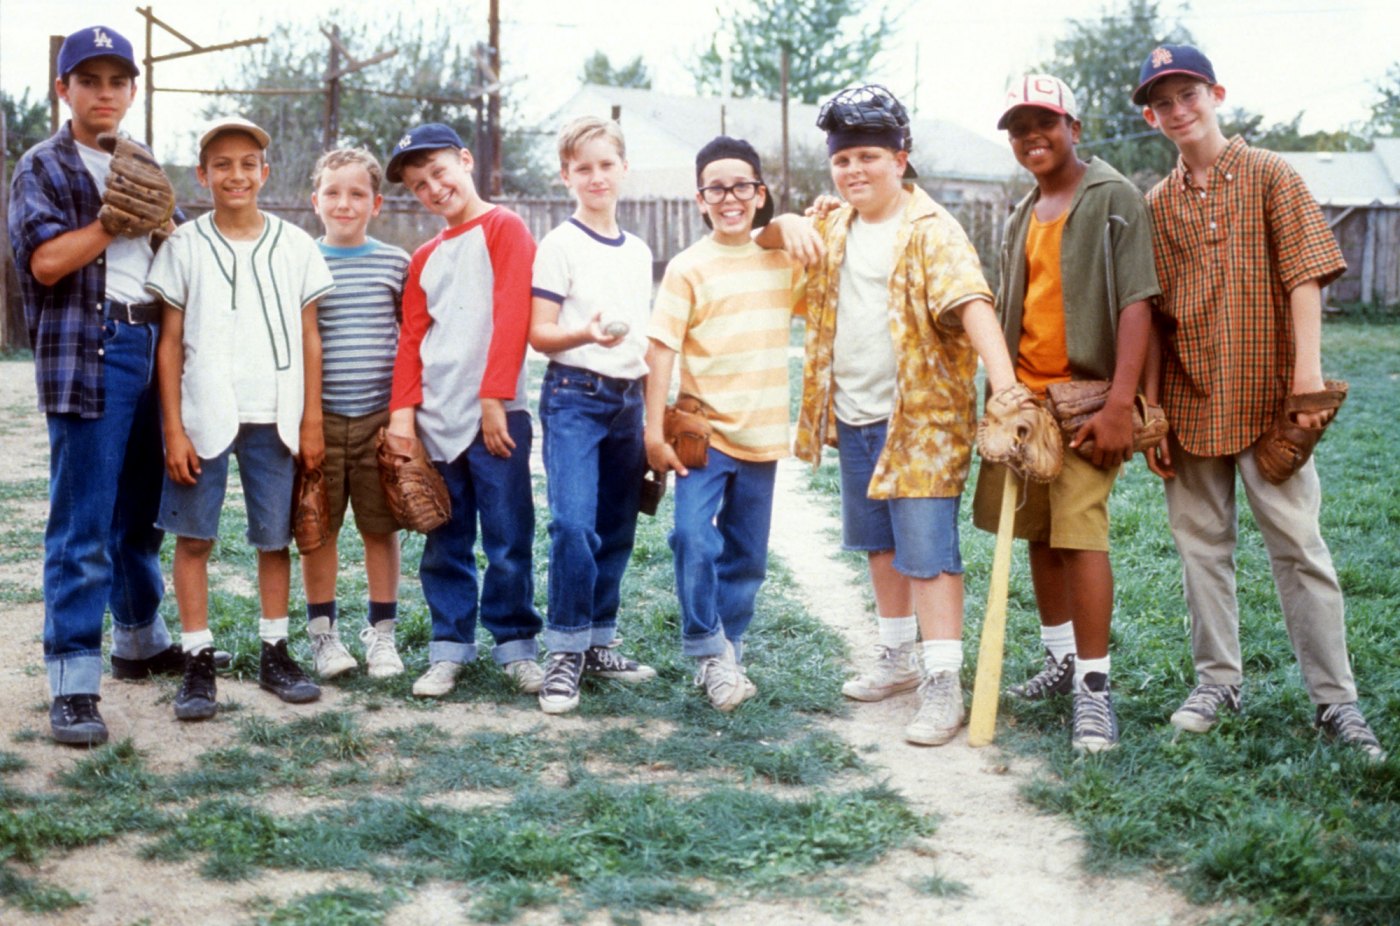 'The Sandlot' Cast: Where Are They Now?